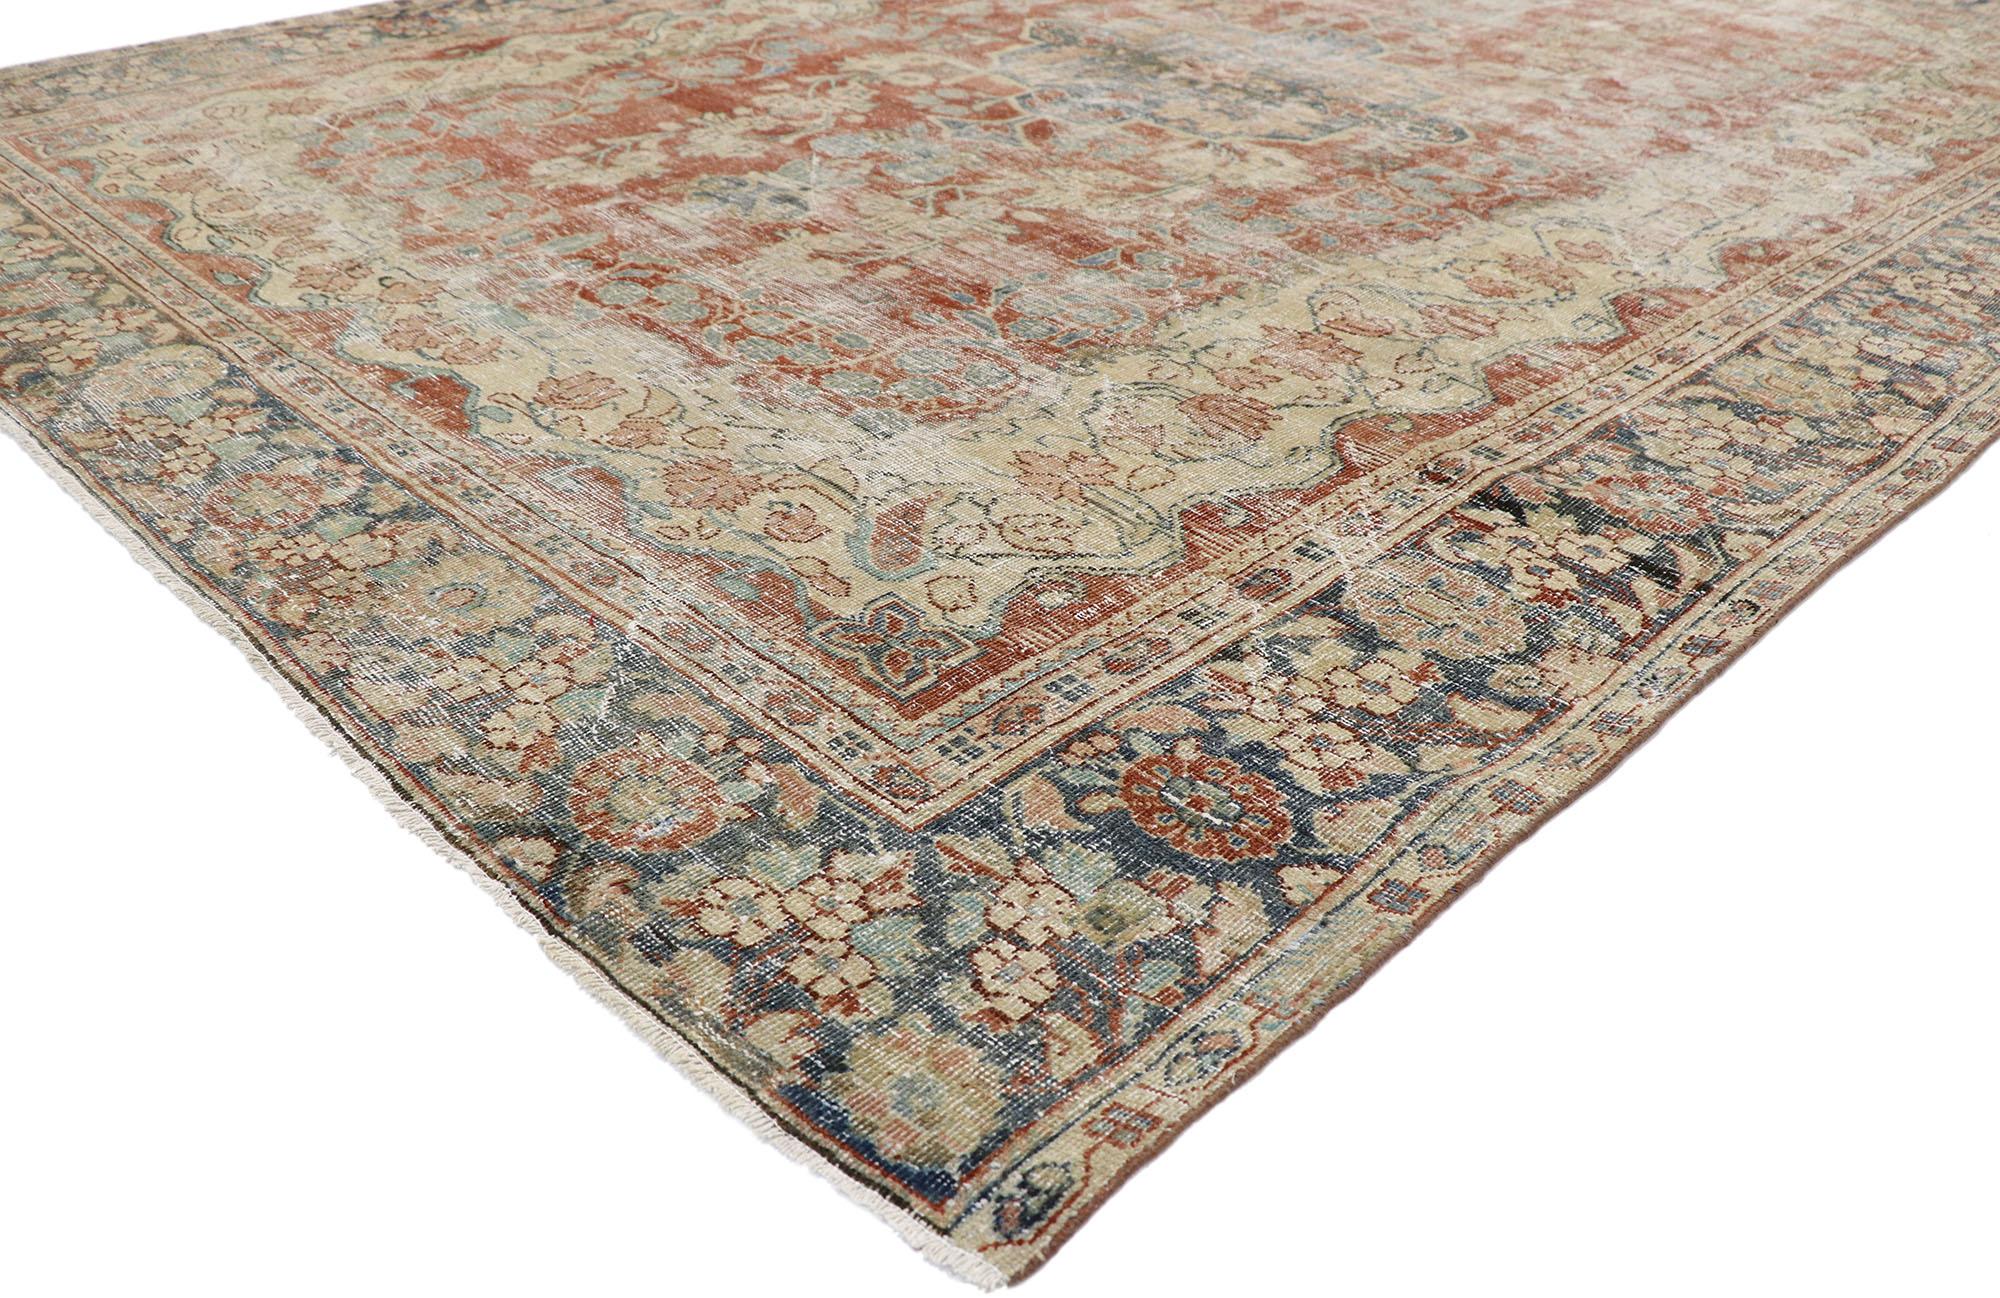 60832, distressed antique Persian Mahal rug with Rustic Modern Spanish Farmhouse style. Cleverly composed and effortlessly chic with rustic Andalusian sensibility, this hand knotted wool distressed antique Persian Mahal rug will take on a curated